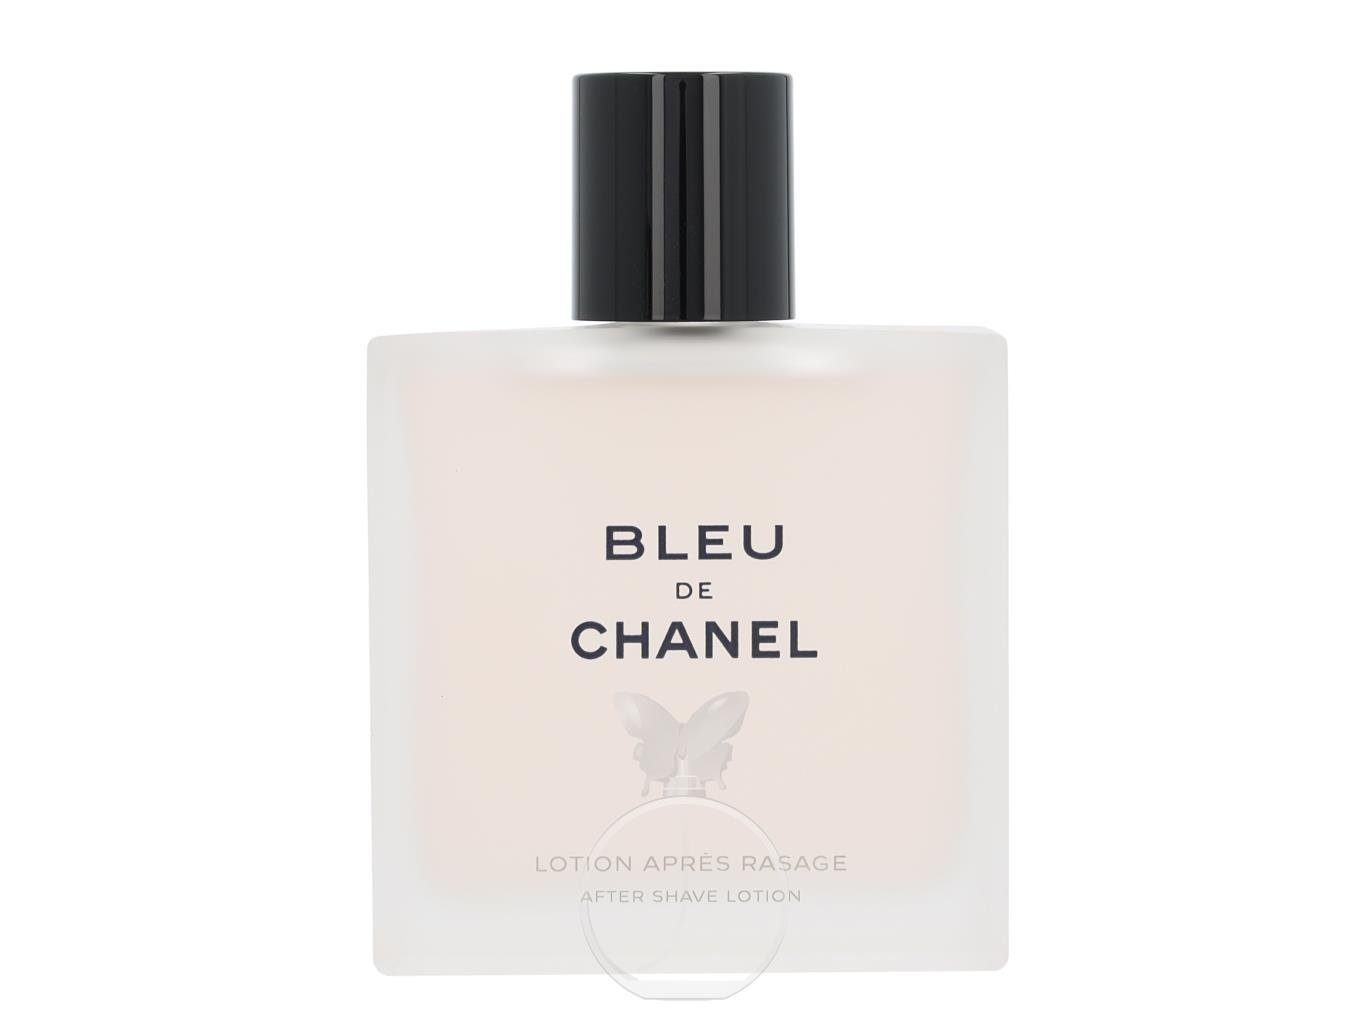 CHANEL After Shave Chanel Lotion Bleu 100 Chanel After ml Shave Lotion Packung de